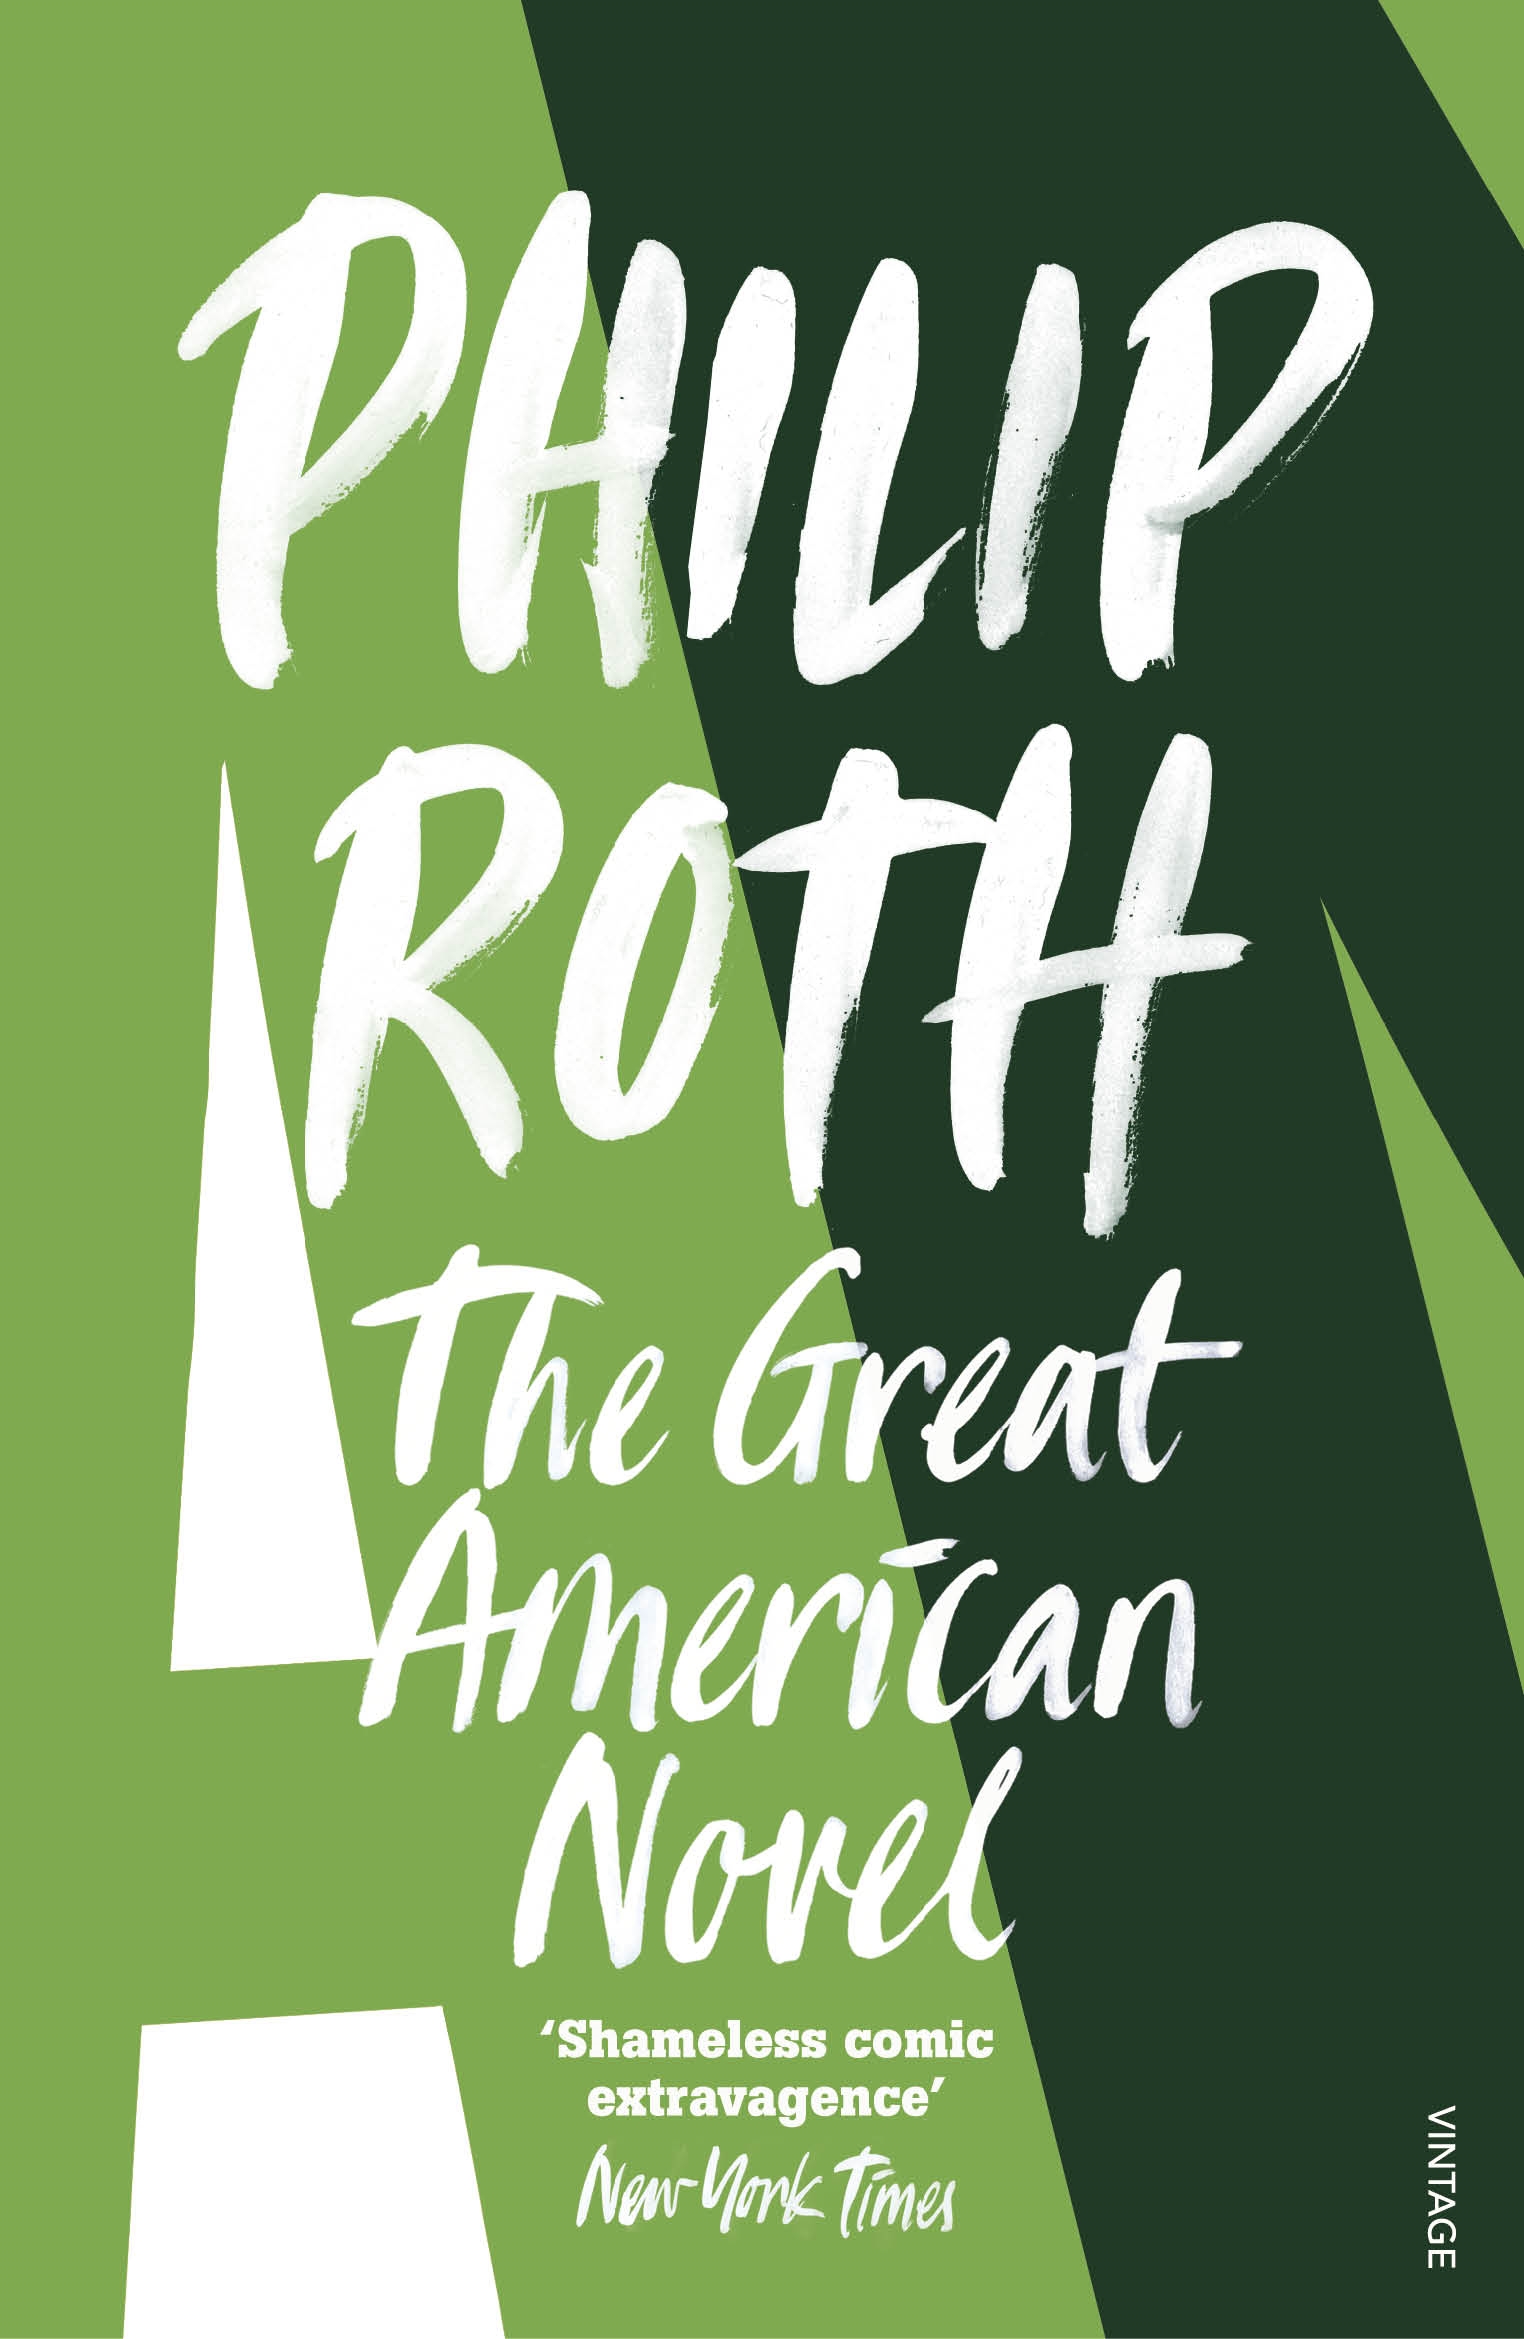 The Great American Novel by Philip Roth - Penguin Books Australia